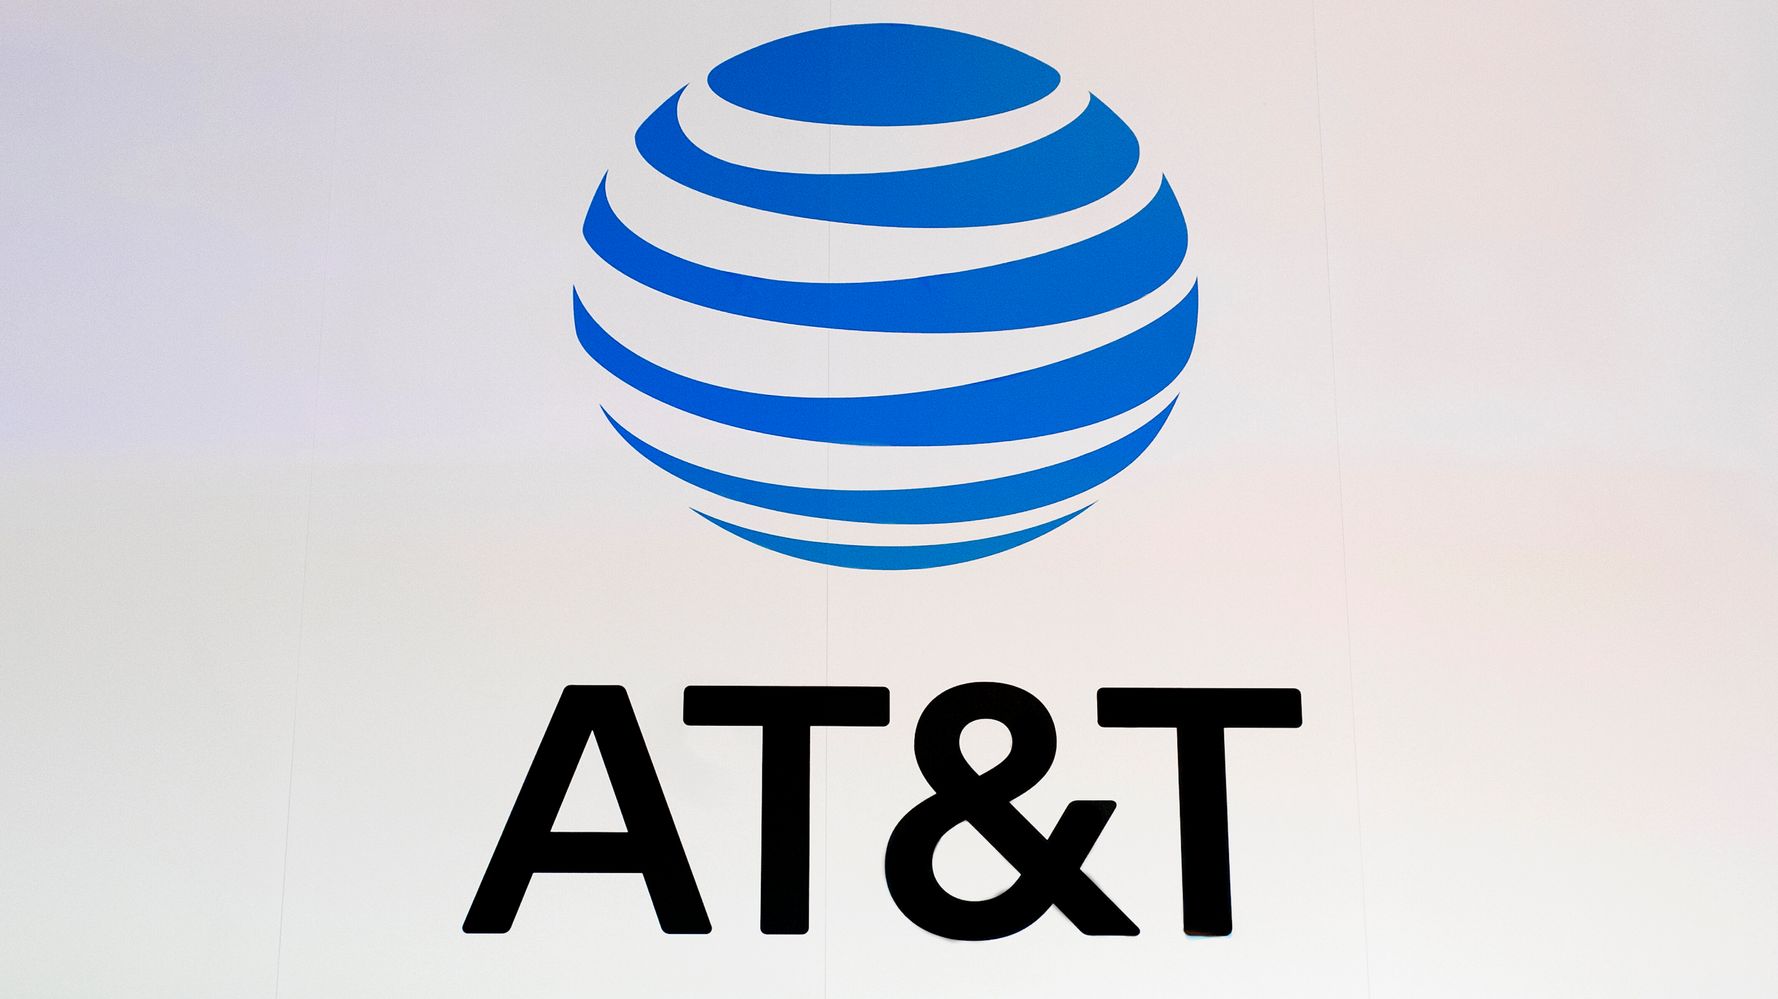 AT&T Signs Deal To Combine Media Operations, Including CNN, With Discovery